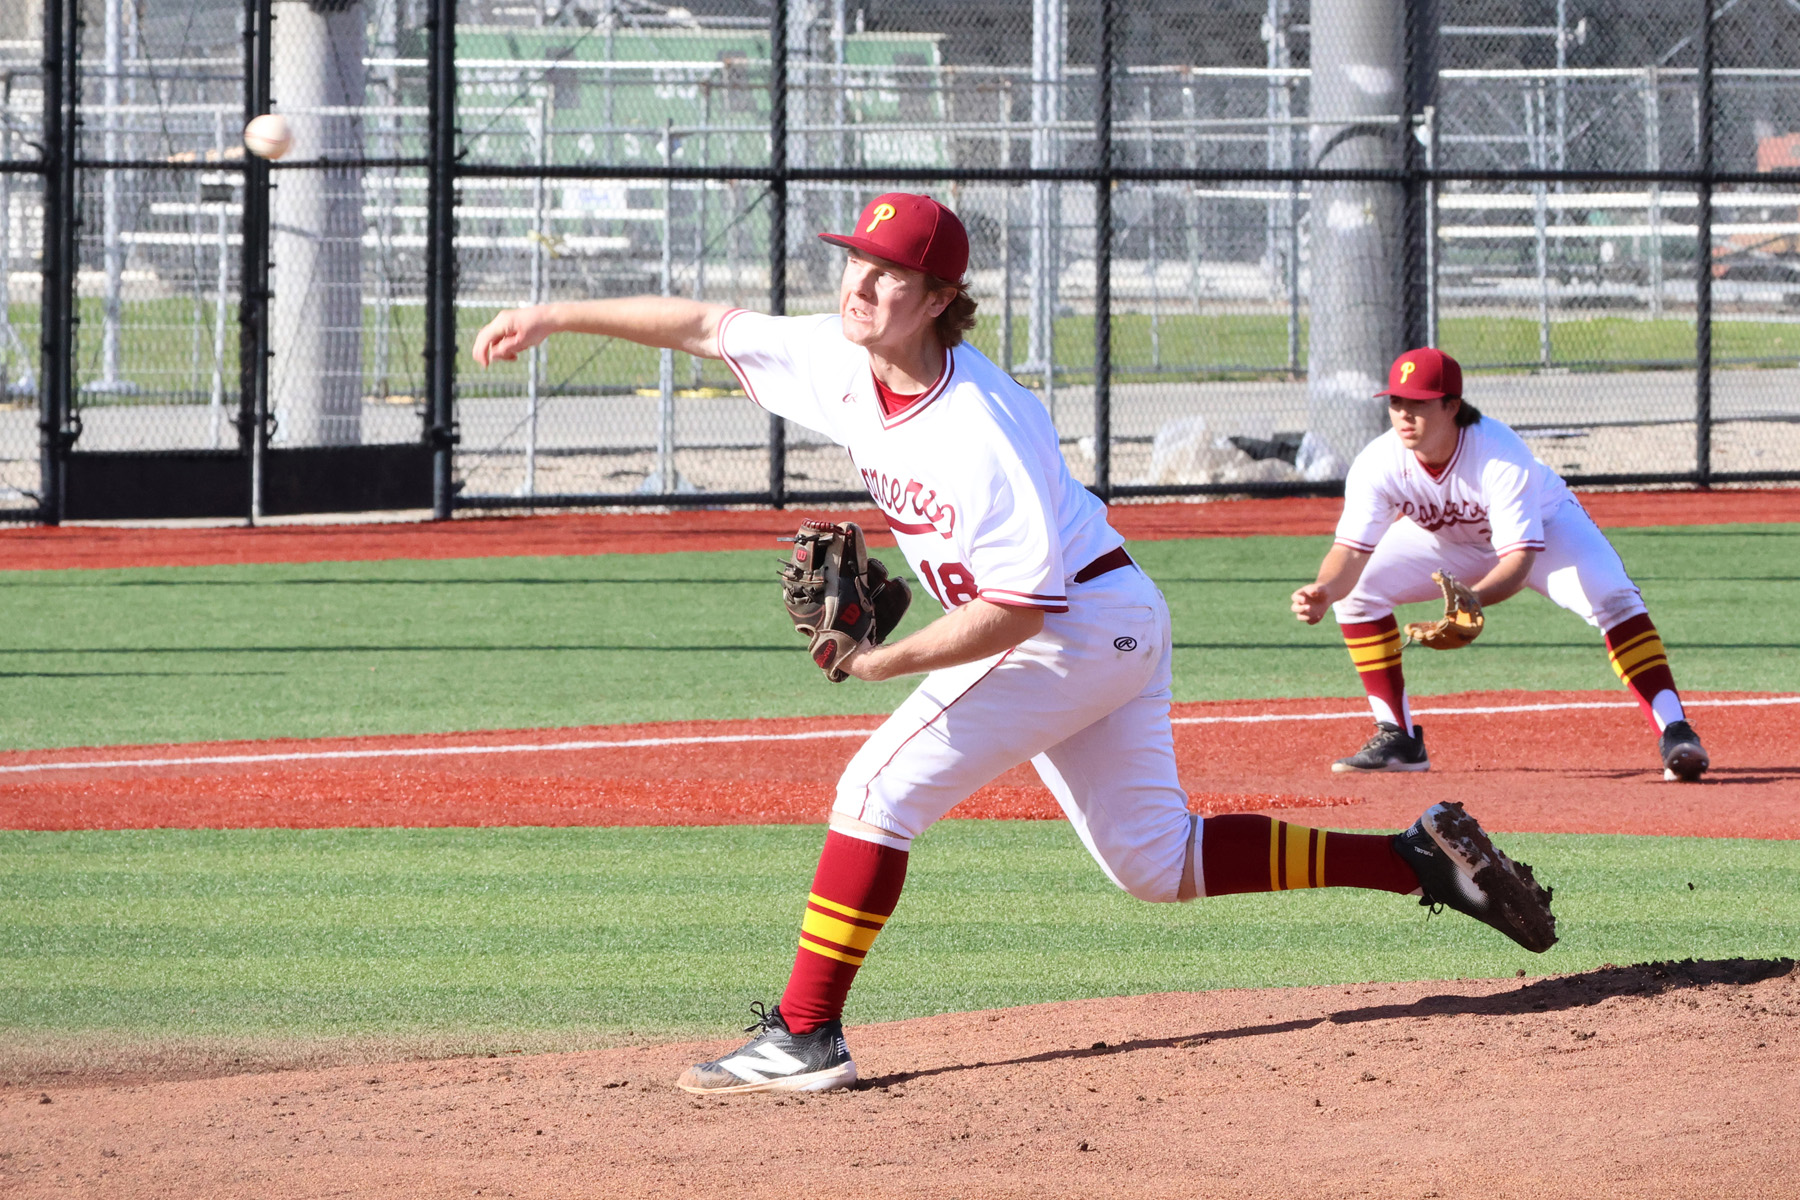 Joe Bacon pitched PCC to a win on Saturday (photo by Richard Quinton).